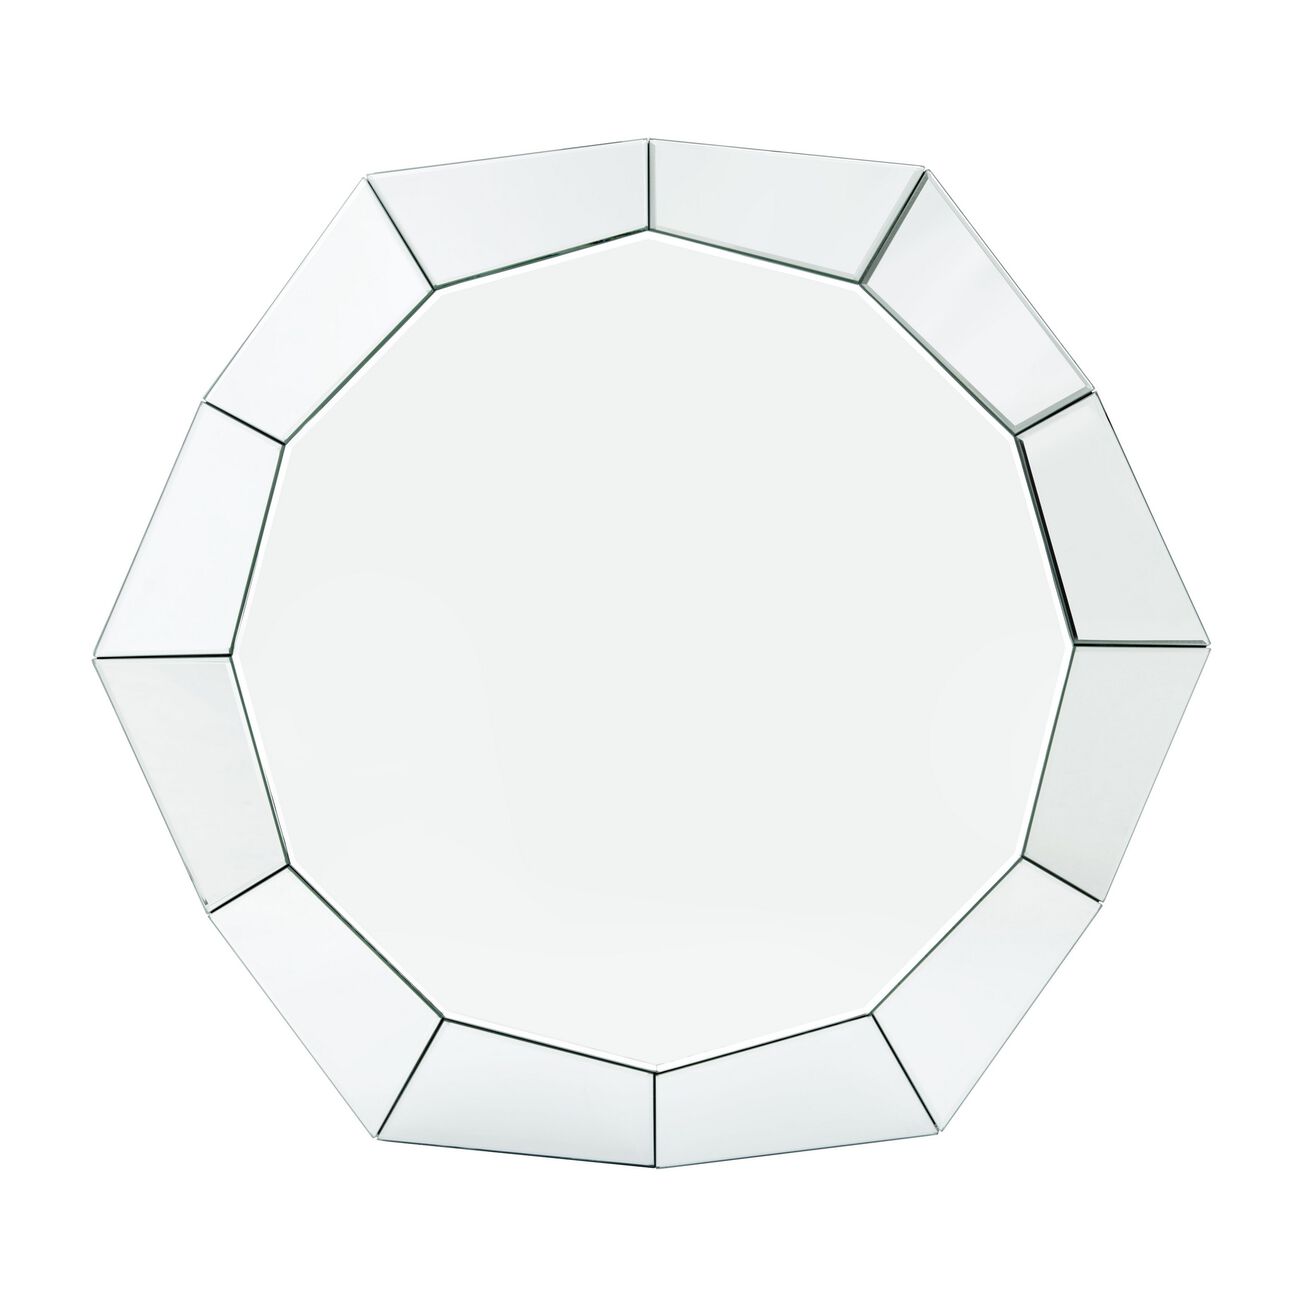 Mirror Octagonal Shape Coffee Table with Faux Diamond Inlays, Silver